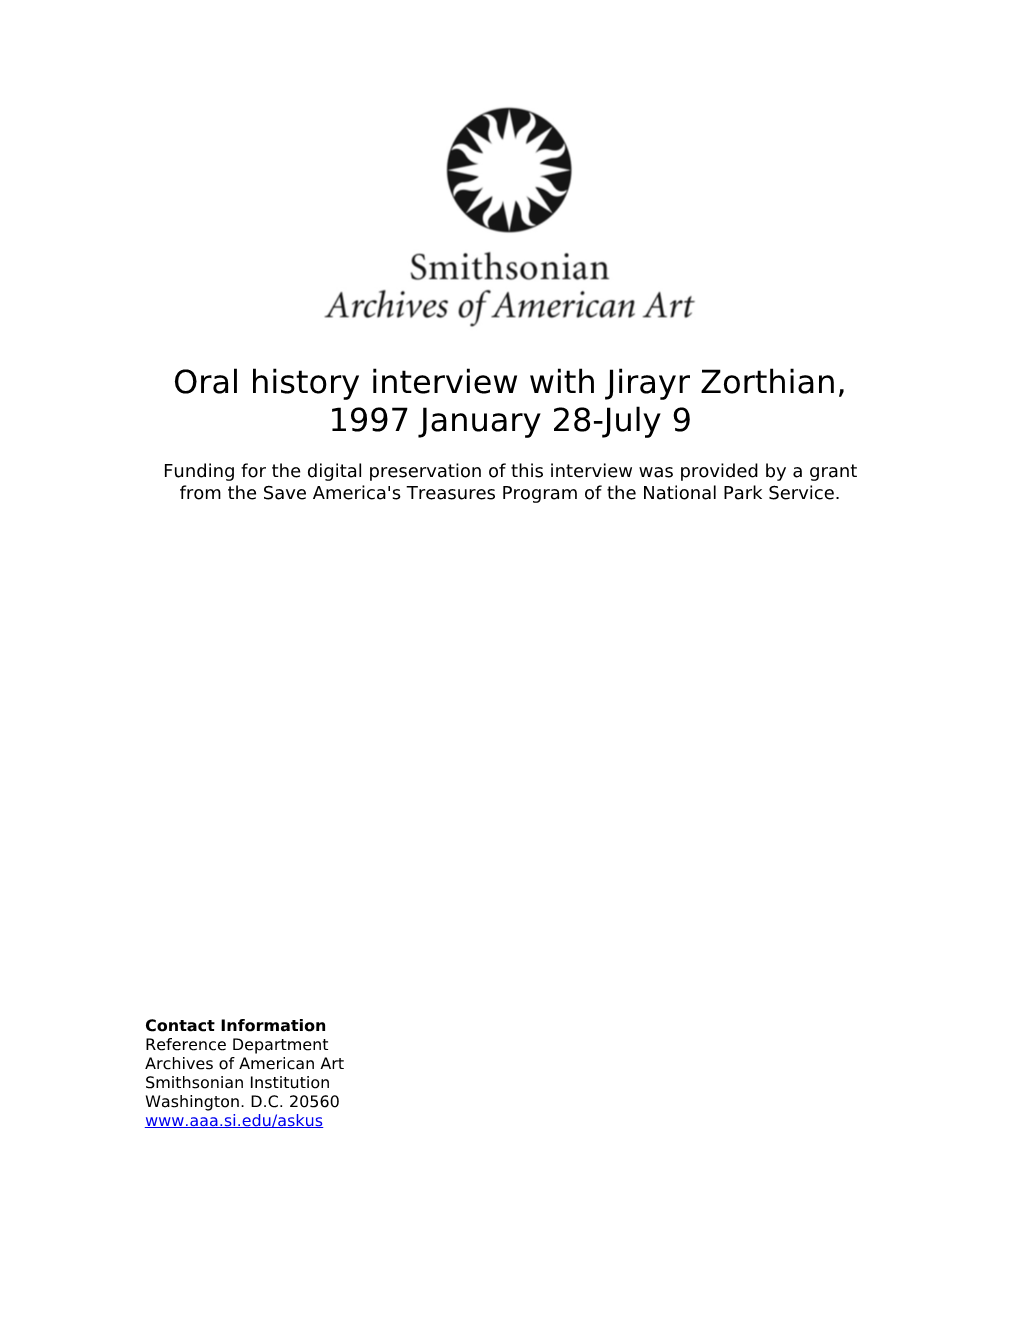 Oral History Interview with Jirayr Zorthian, 1997 January 28-July 9